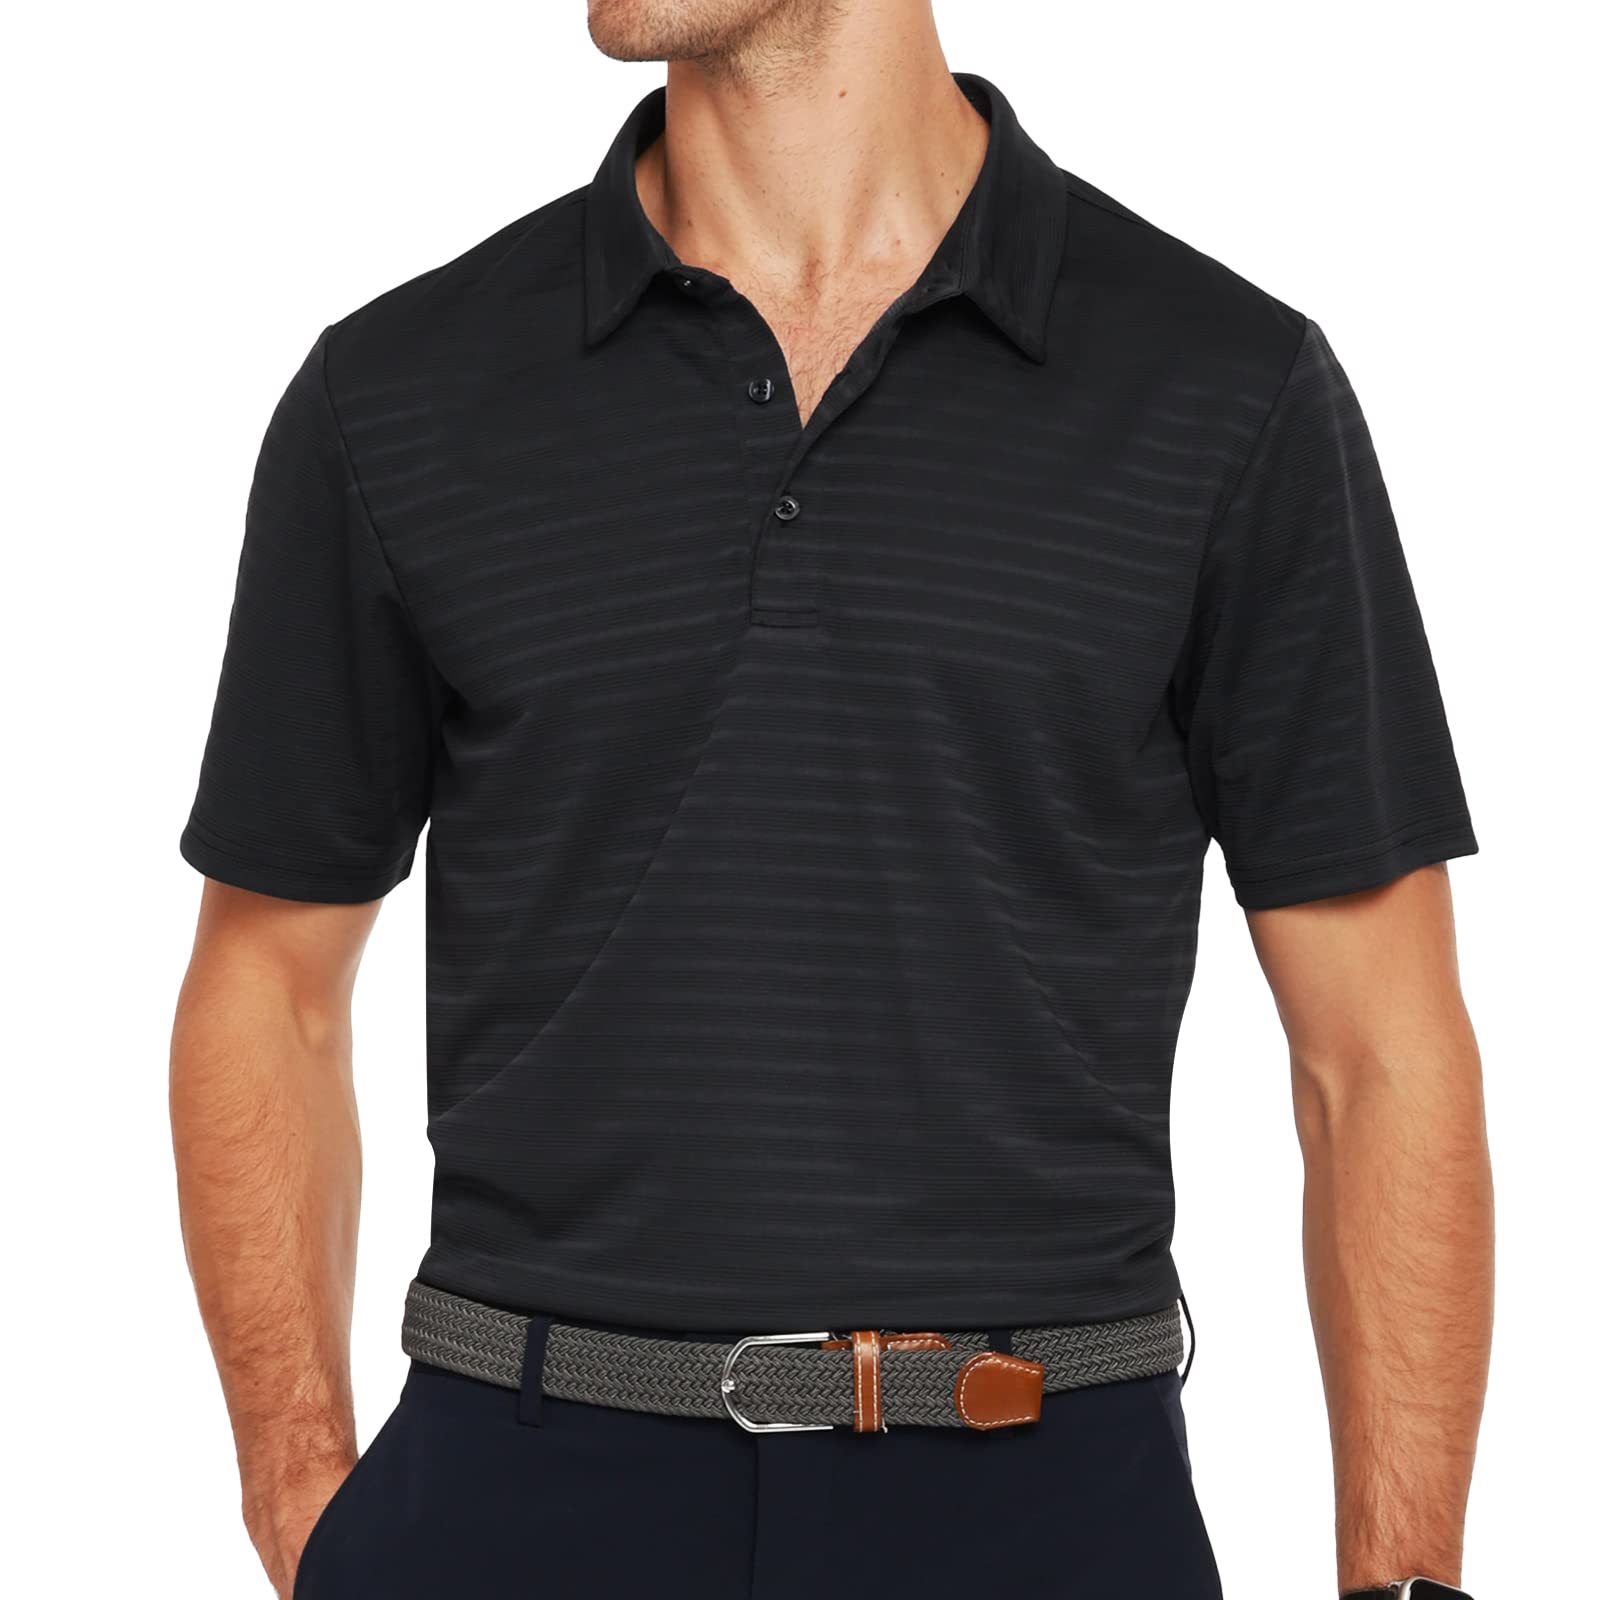 MIER Men Striped Polo Shirts Quick Dry Golf Collared Shirt